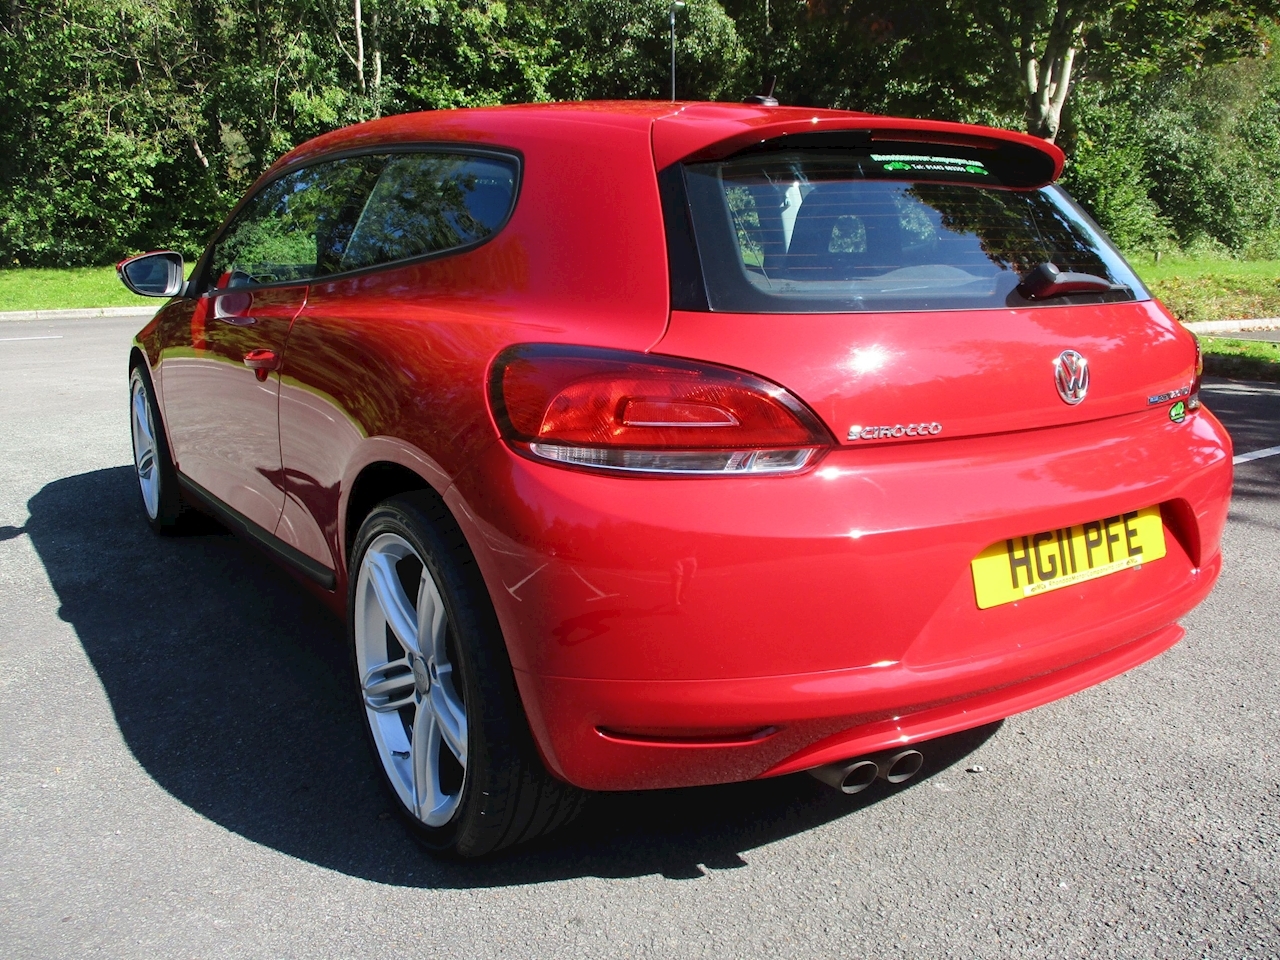 Scirocco 2.0 TDI Coupe 3dr Diesel Manual (134 g/km, 138 bhp) Coupe 2.0 Manual Diesel